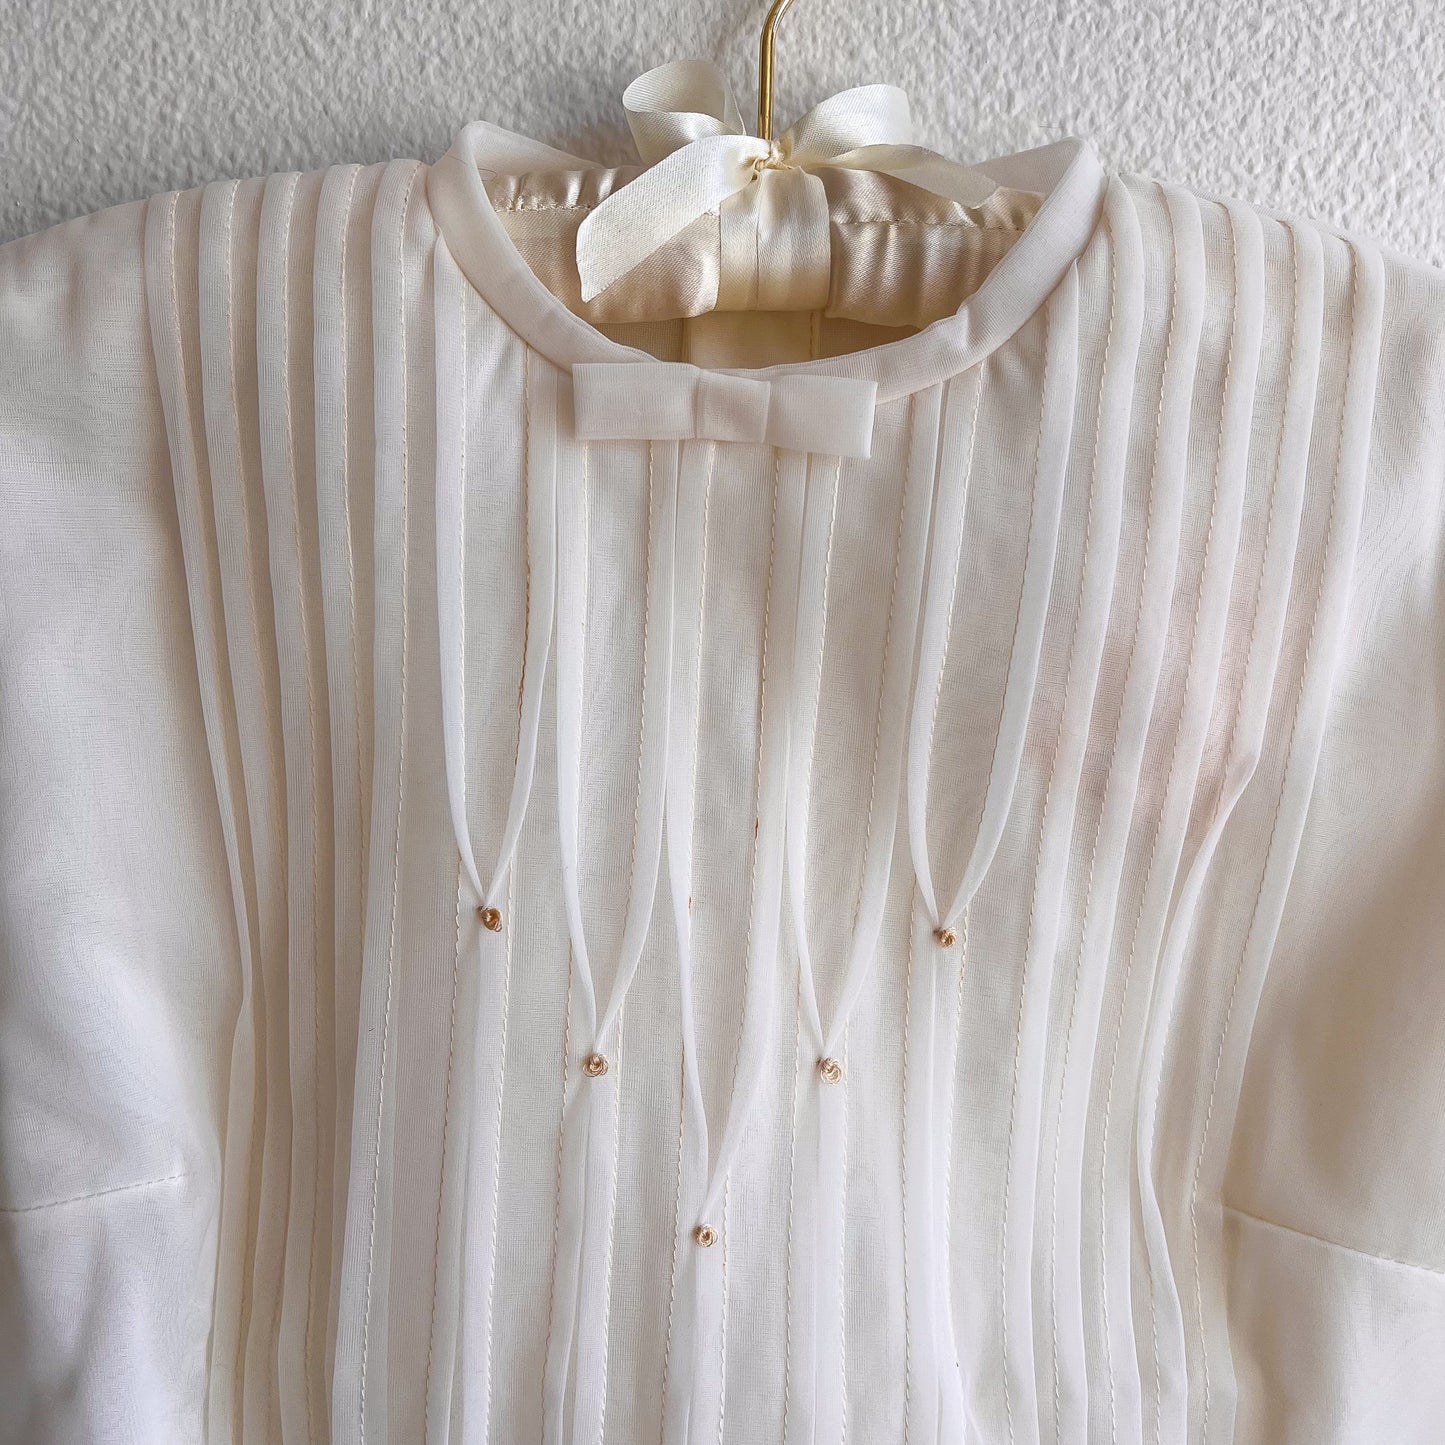 Deadstock 1960s Ivory Pleated Blouse (XS/S)